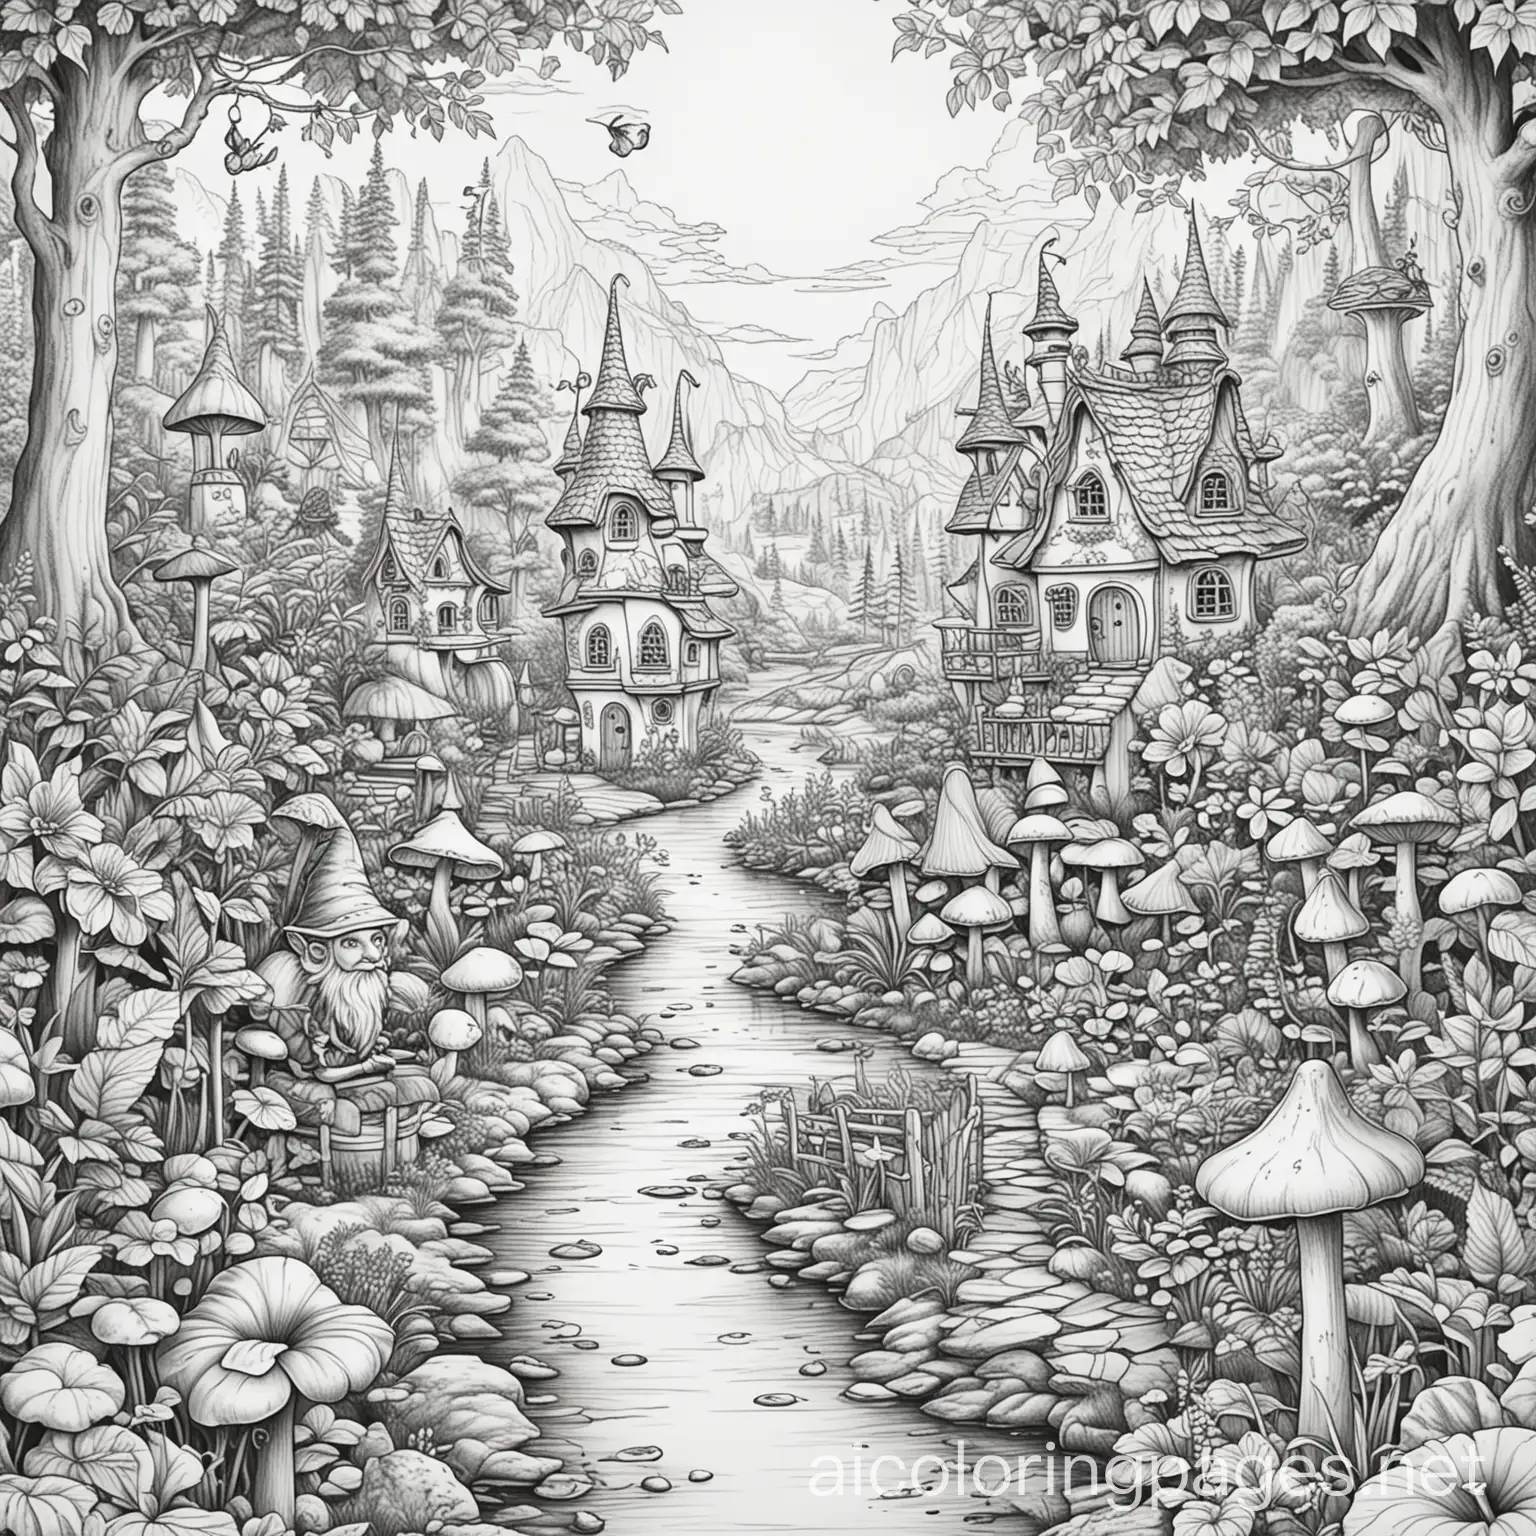 Fairies and Gnomes in a whimsical land realistic but not too detailed, Coloring Page, black and white, line art, white background, Simplicity, Ample White Space. The background of the coloring page is plain white to make it easy for young children to color within the lines. The outlines of all the subjects are easy to distinguish, making it simple for kids to color without too much difficulty